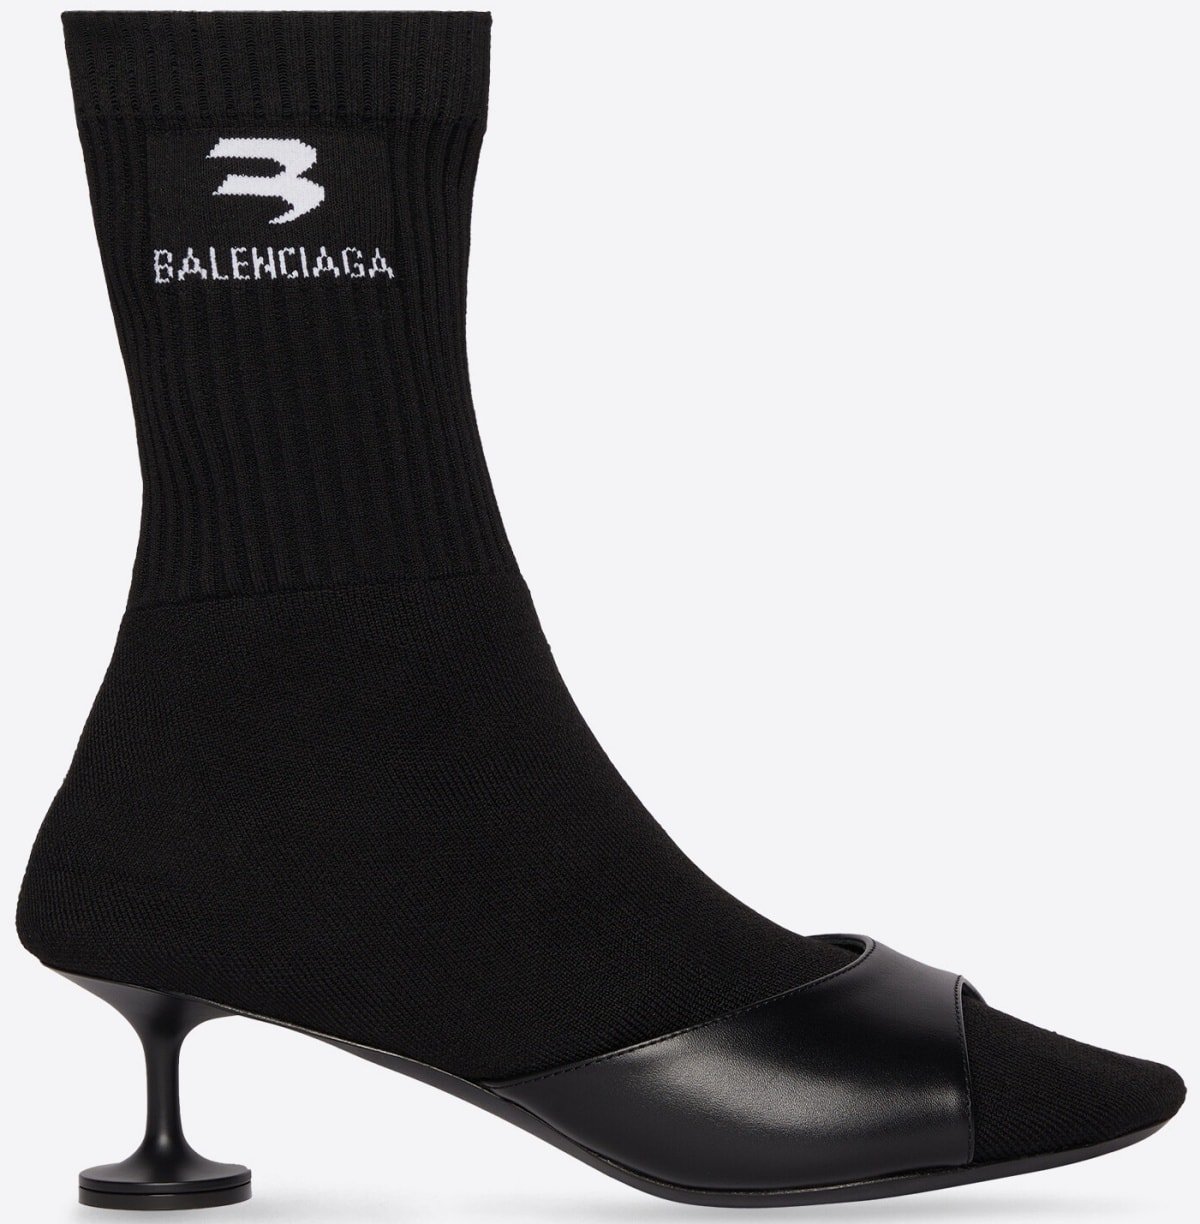 These Balenciaga sock booties feature ribbed trim and champagne heels